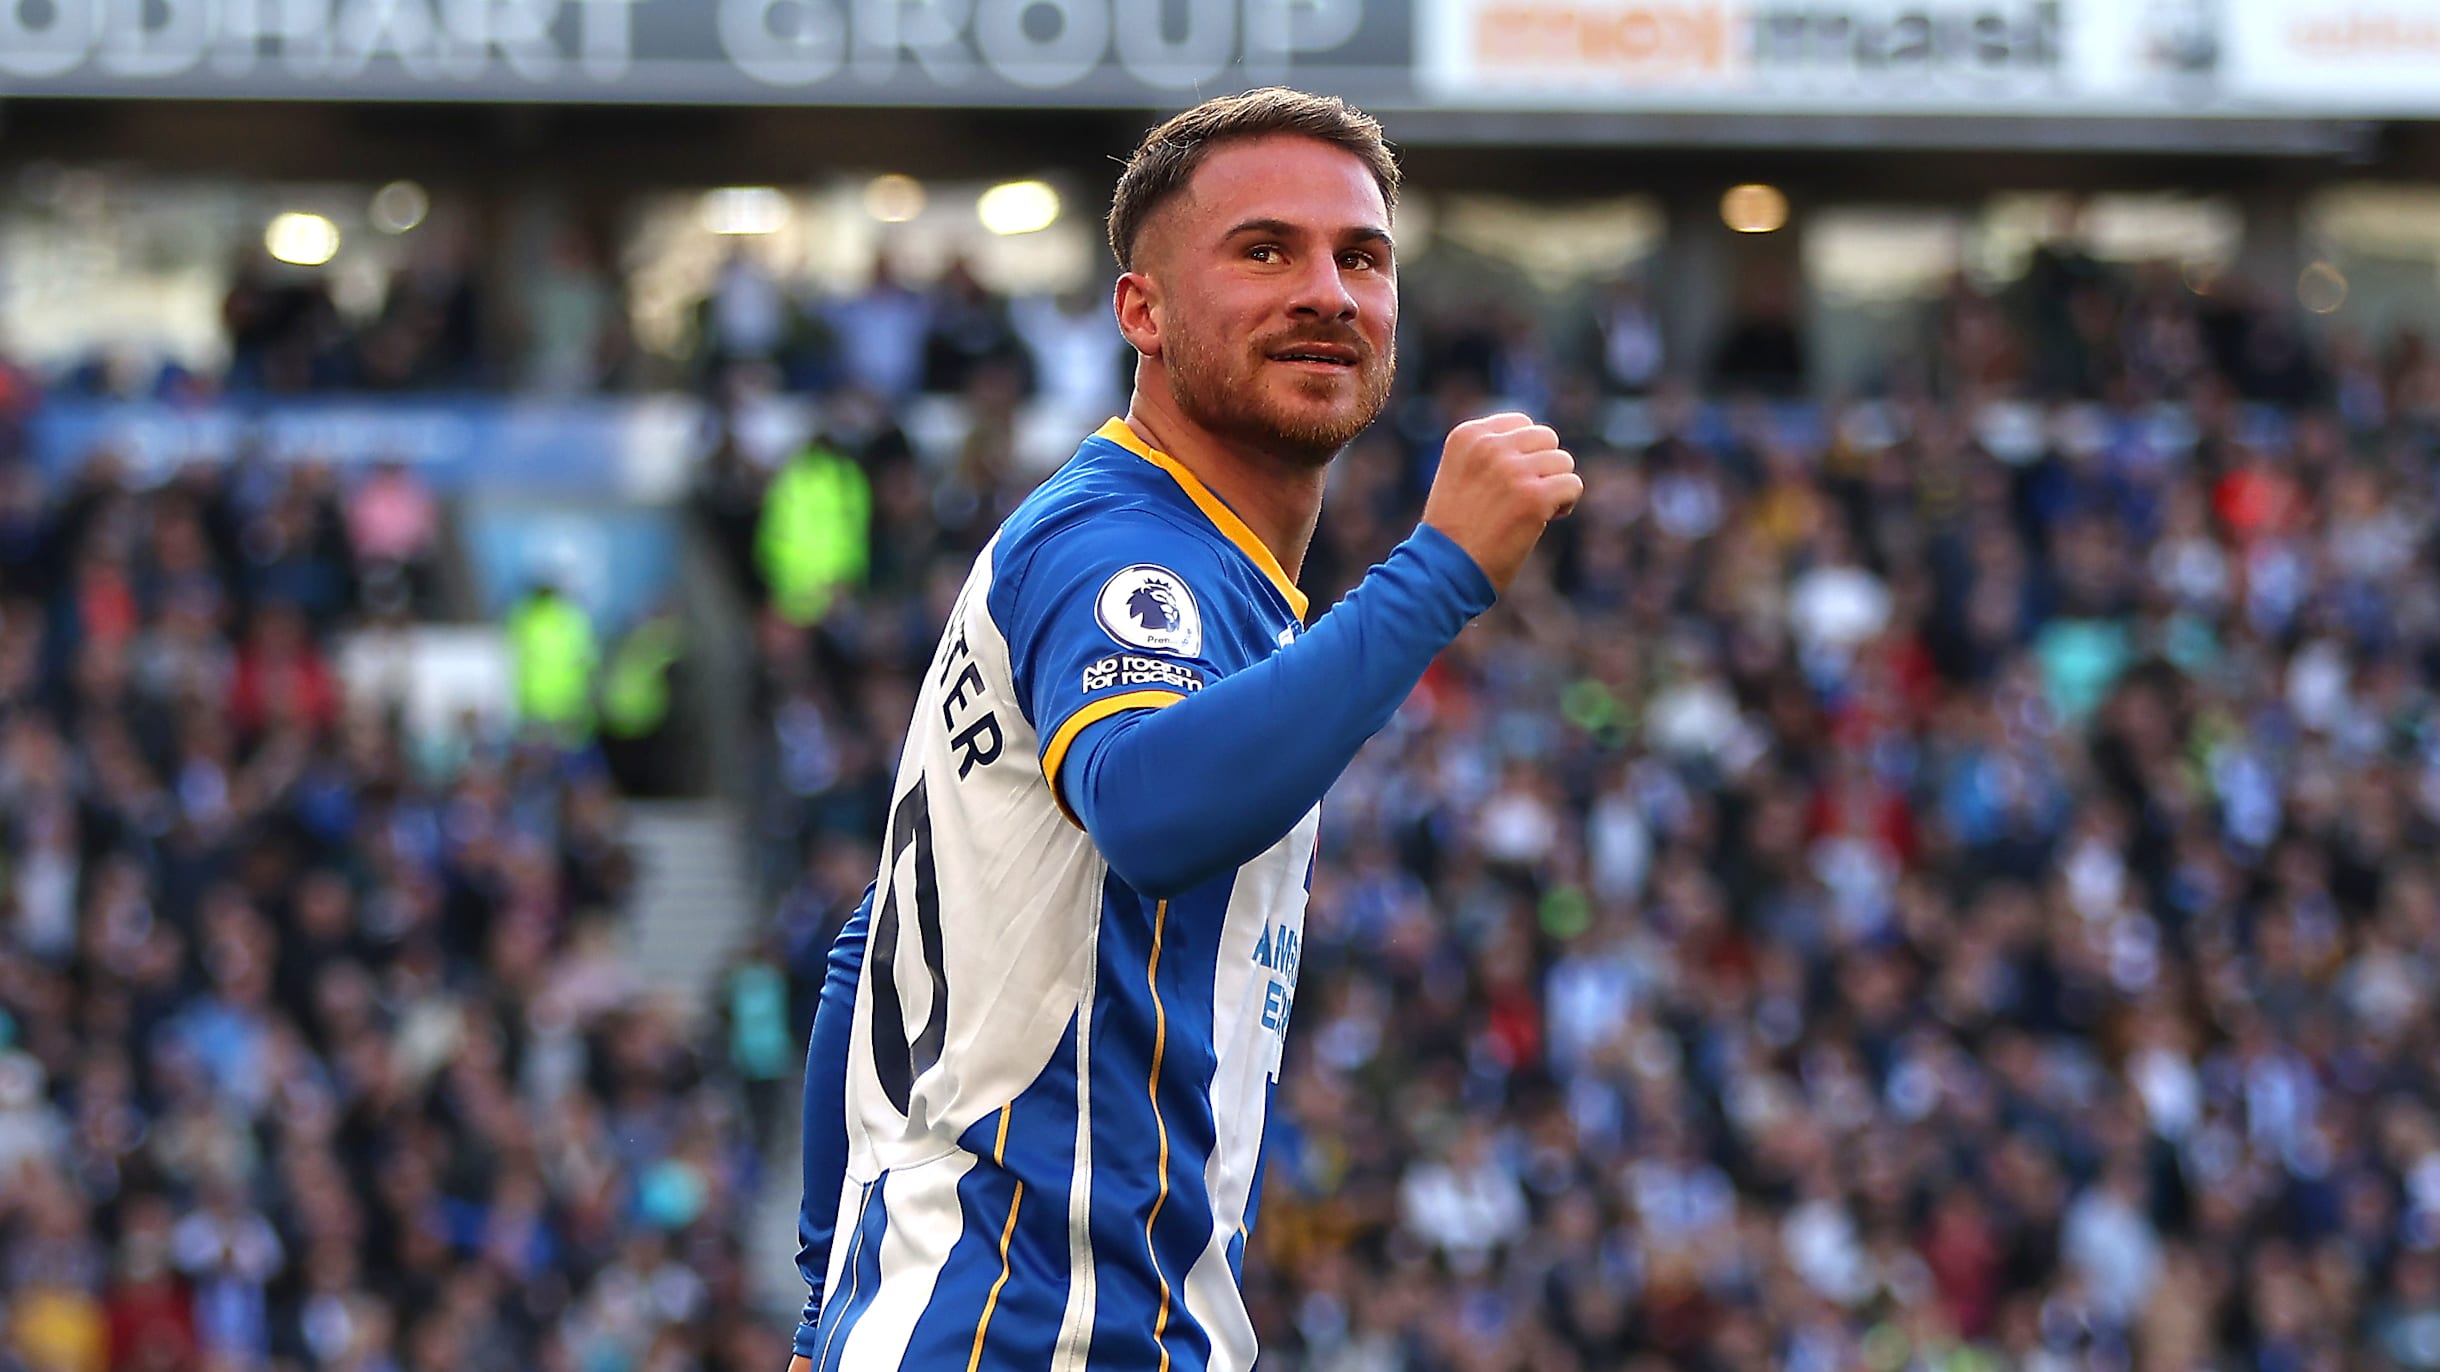 Interview with Brighton midfielder Alexis Mac Allister on life in England and representing Argentina